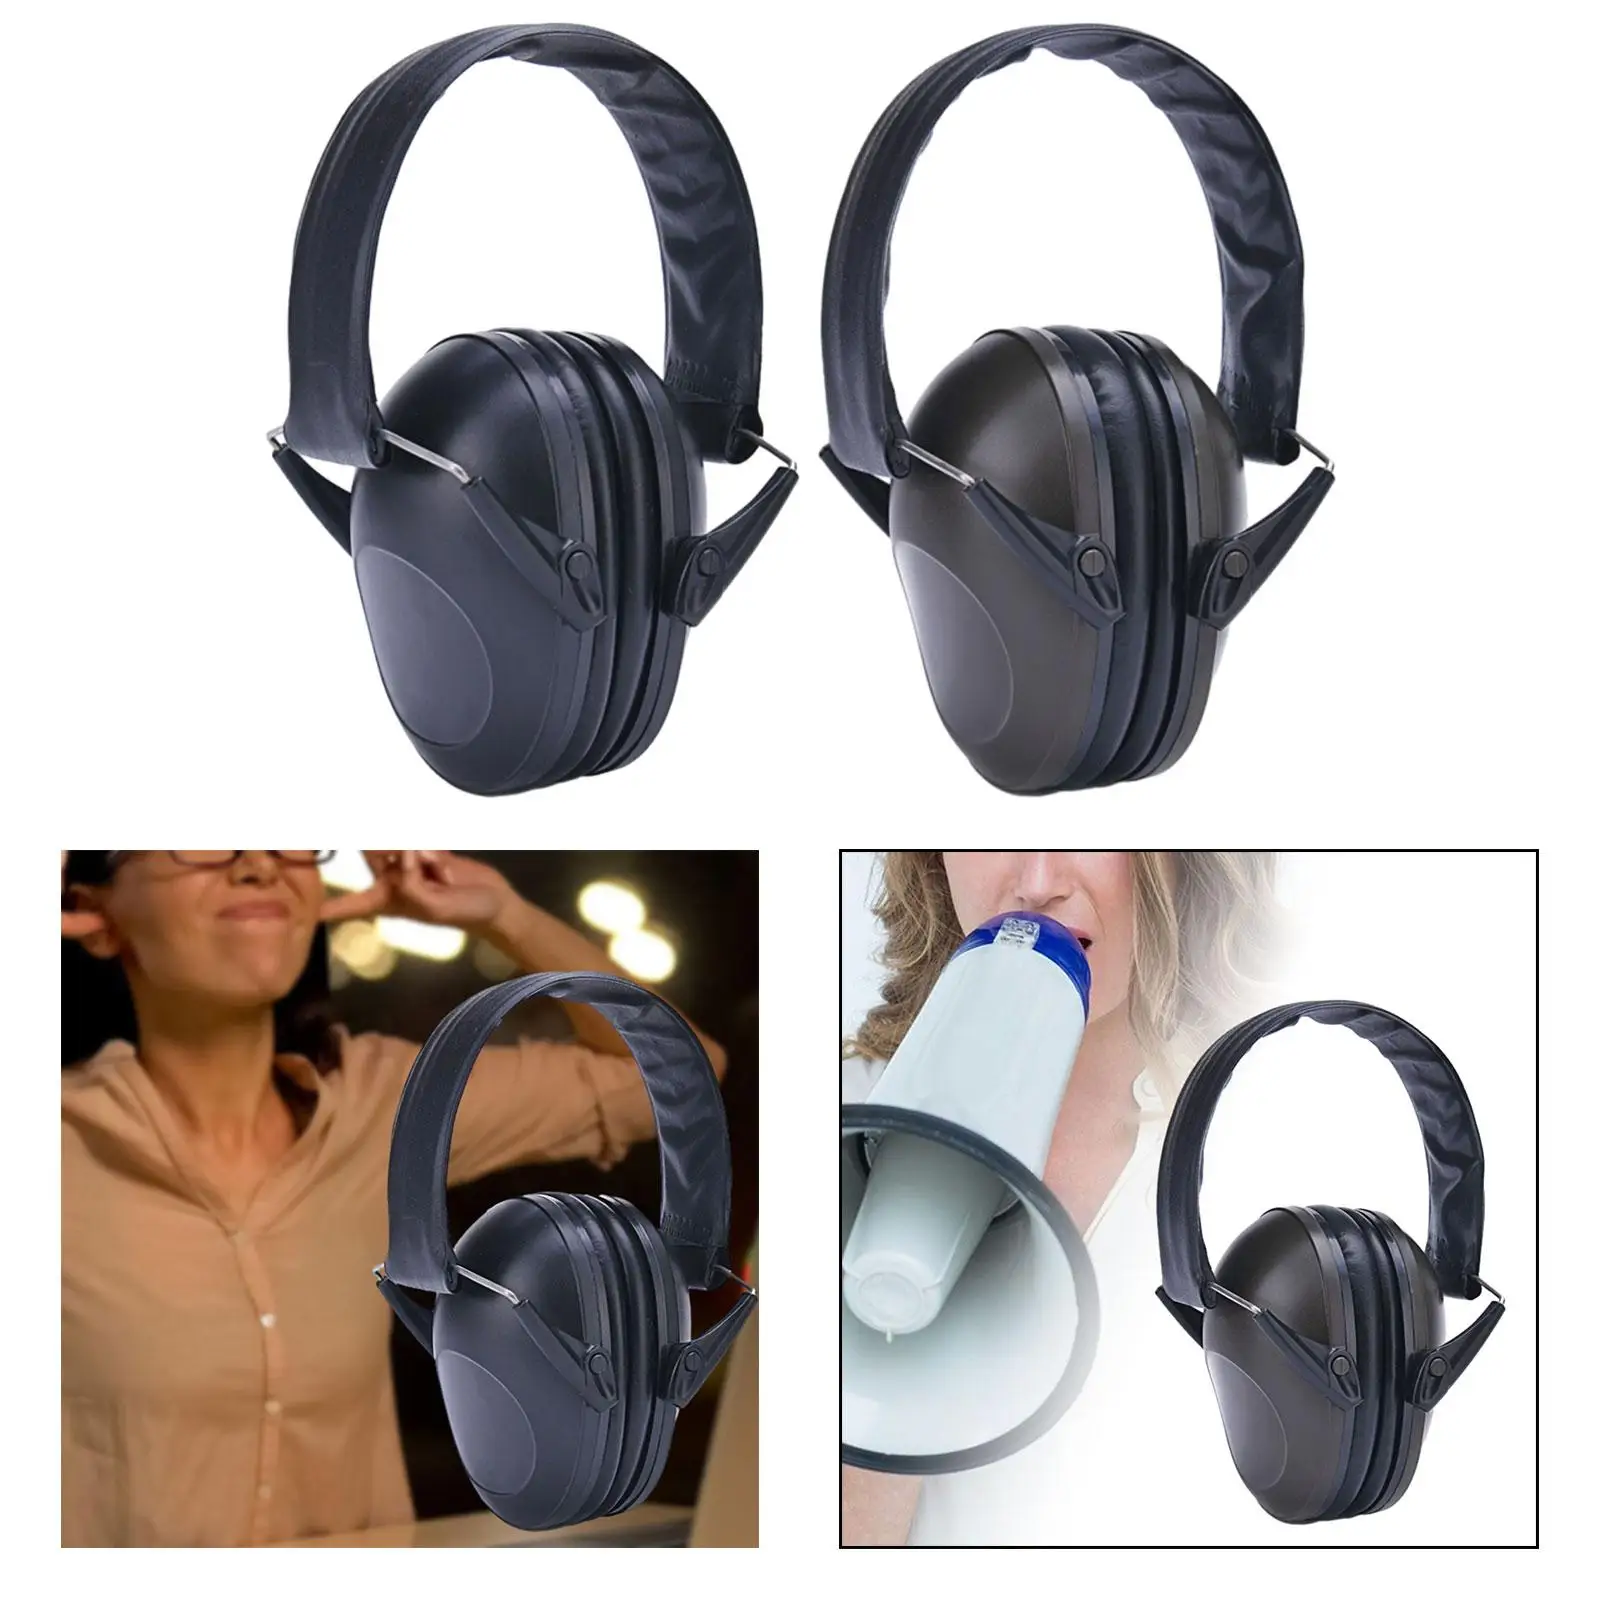 Ear Muff Noise Reducing Compact Soundproof Earmuffs Ear Protection Ear Cups for Business Wood Work Studying Lawn Mowing Gaming